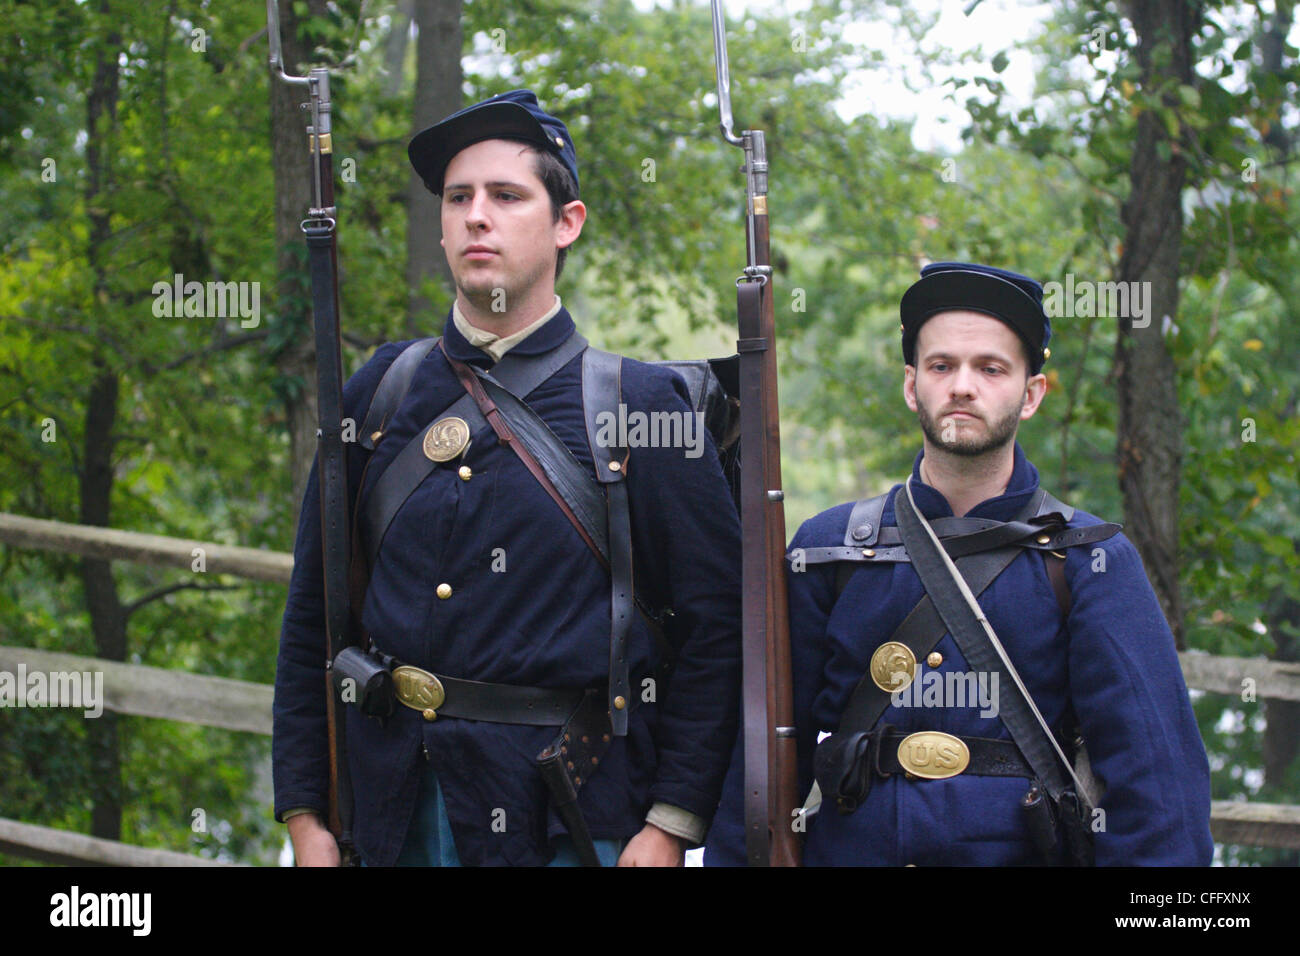 Civil War re-enactors as Union soldiers at Dutch Gap in Chester, Virginia. The American Civil war lasted from 1861-1865. Stock Photo